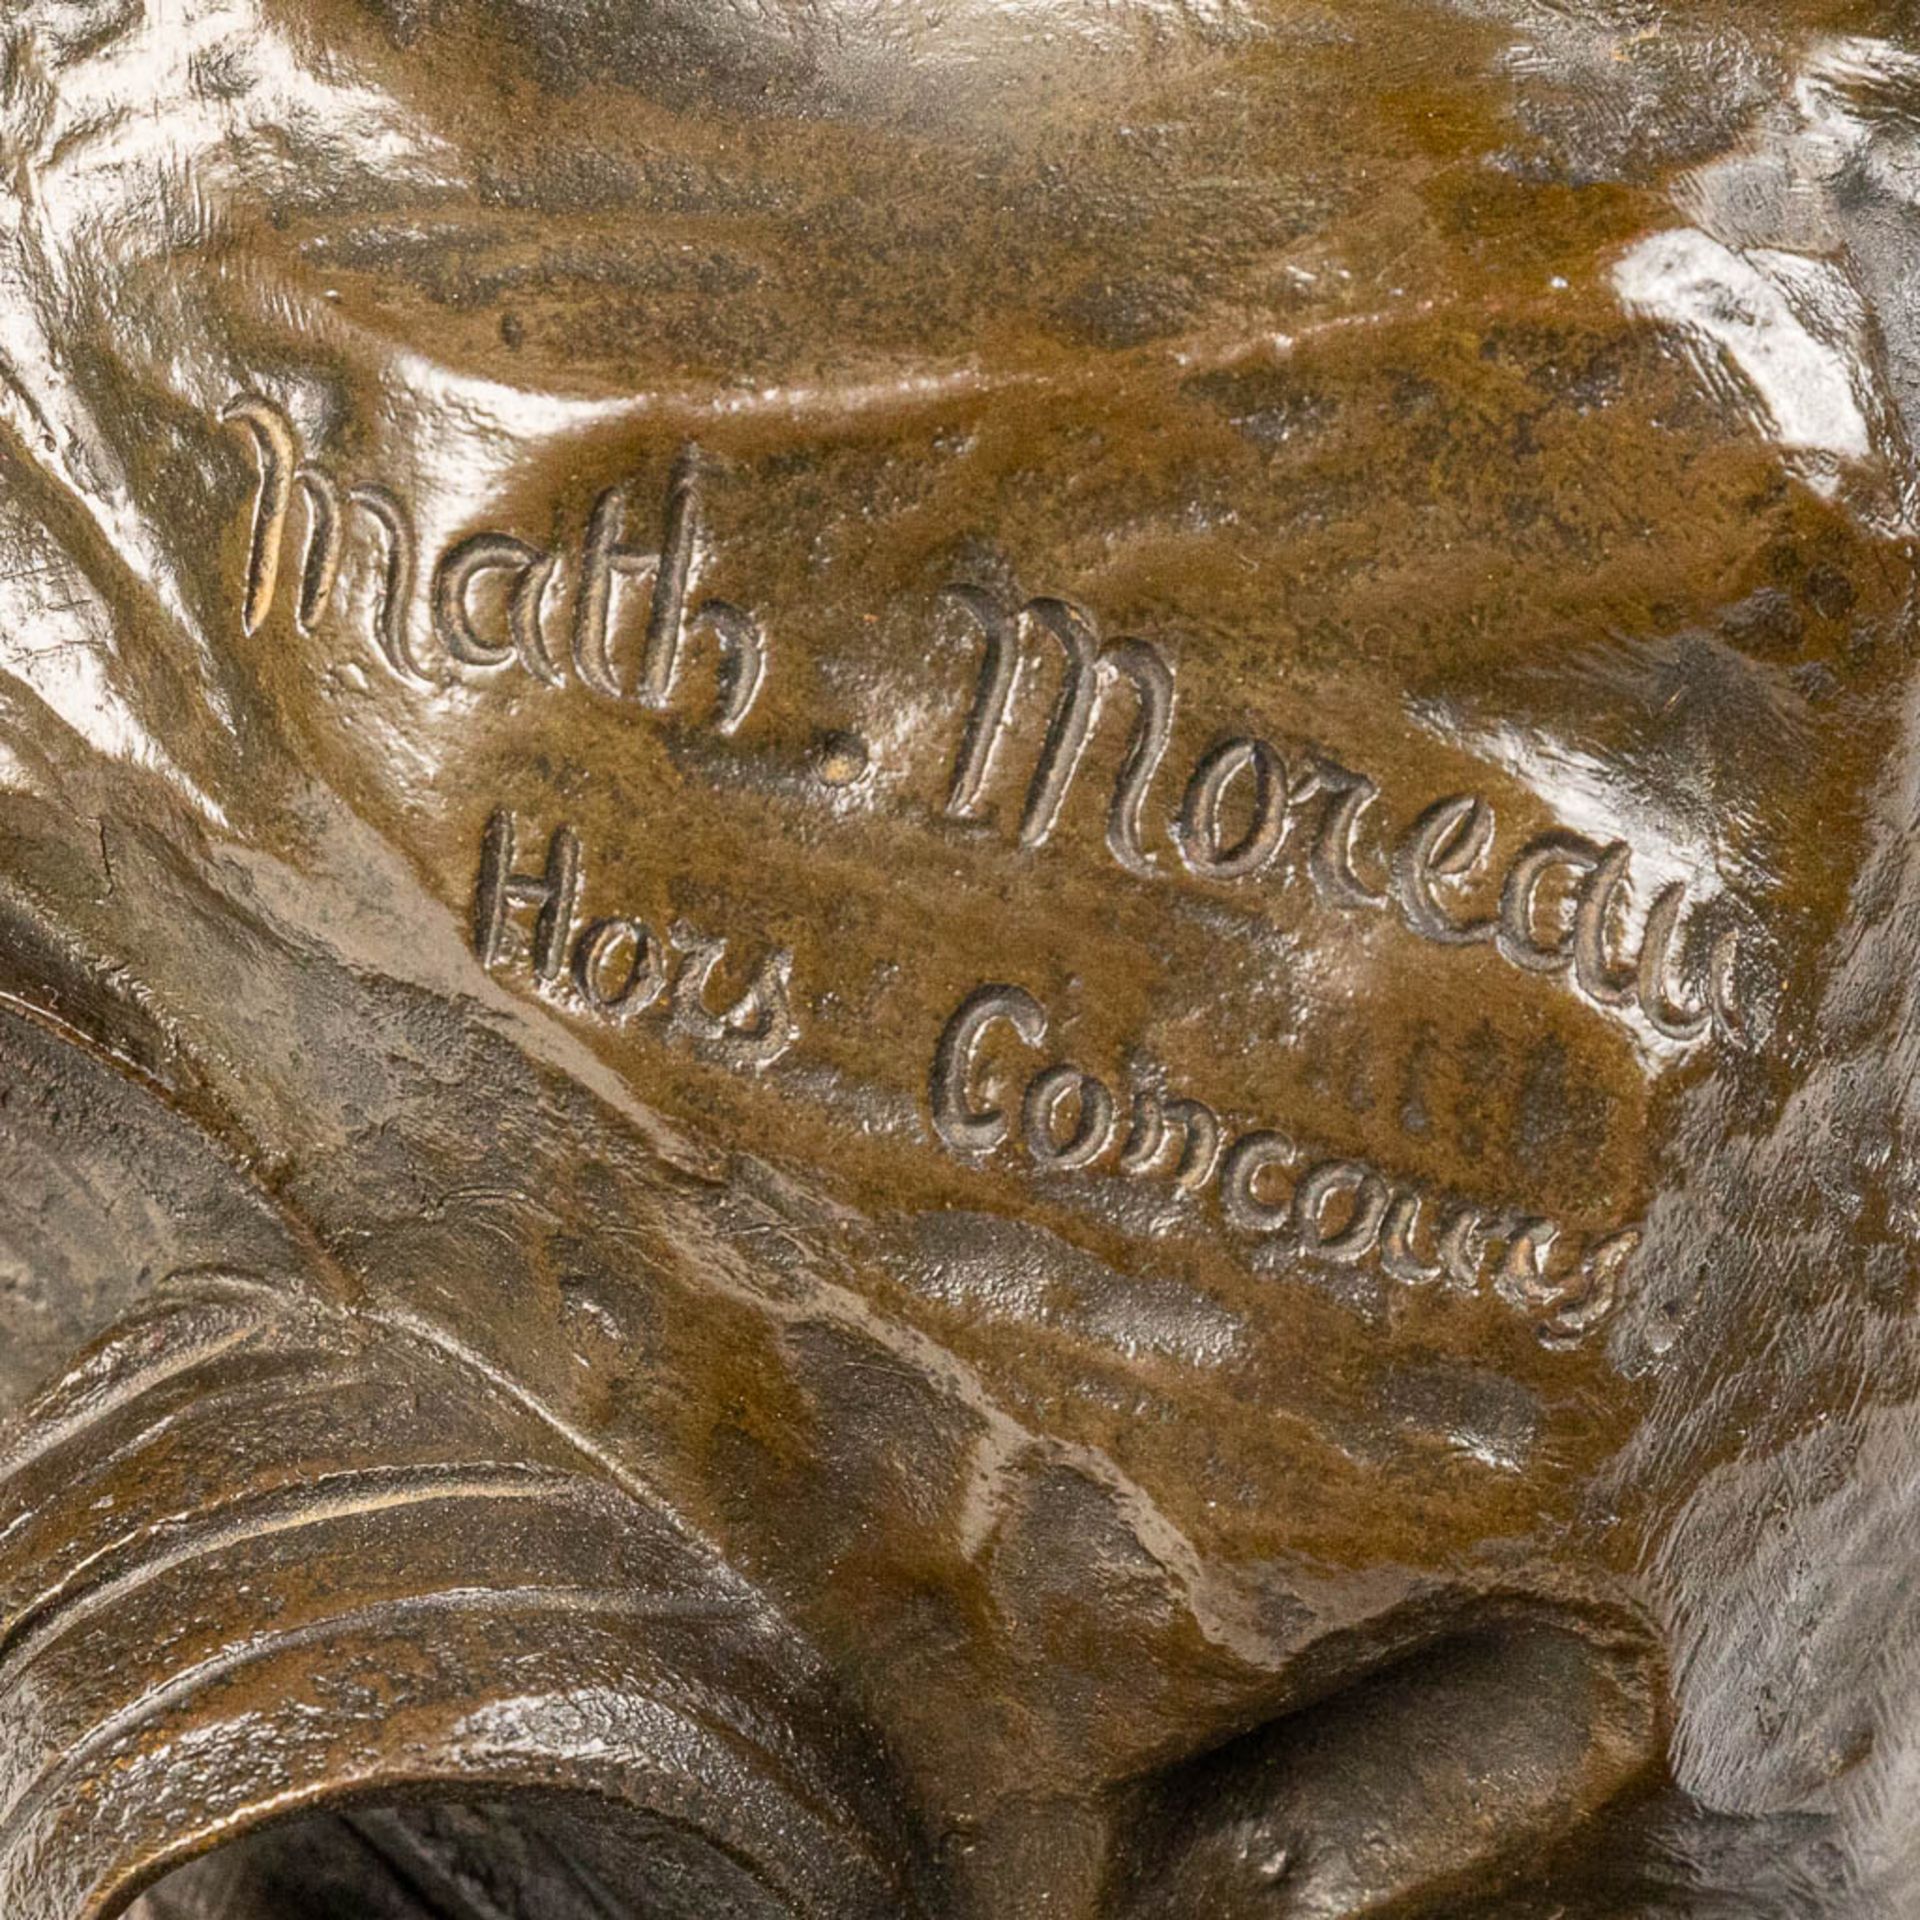 Mathurin MOREAU (1822-1912) 'La Pecheuse' a bronze statue of a fishing lady, marked Hors Concours - Image 11 of 11